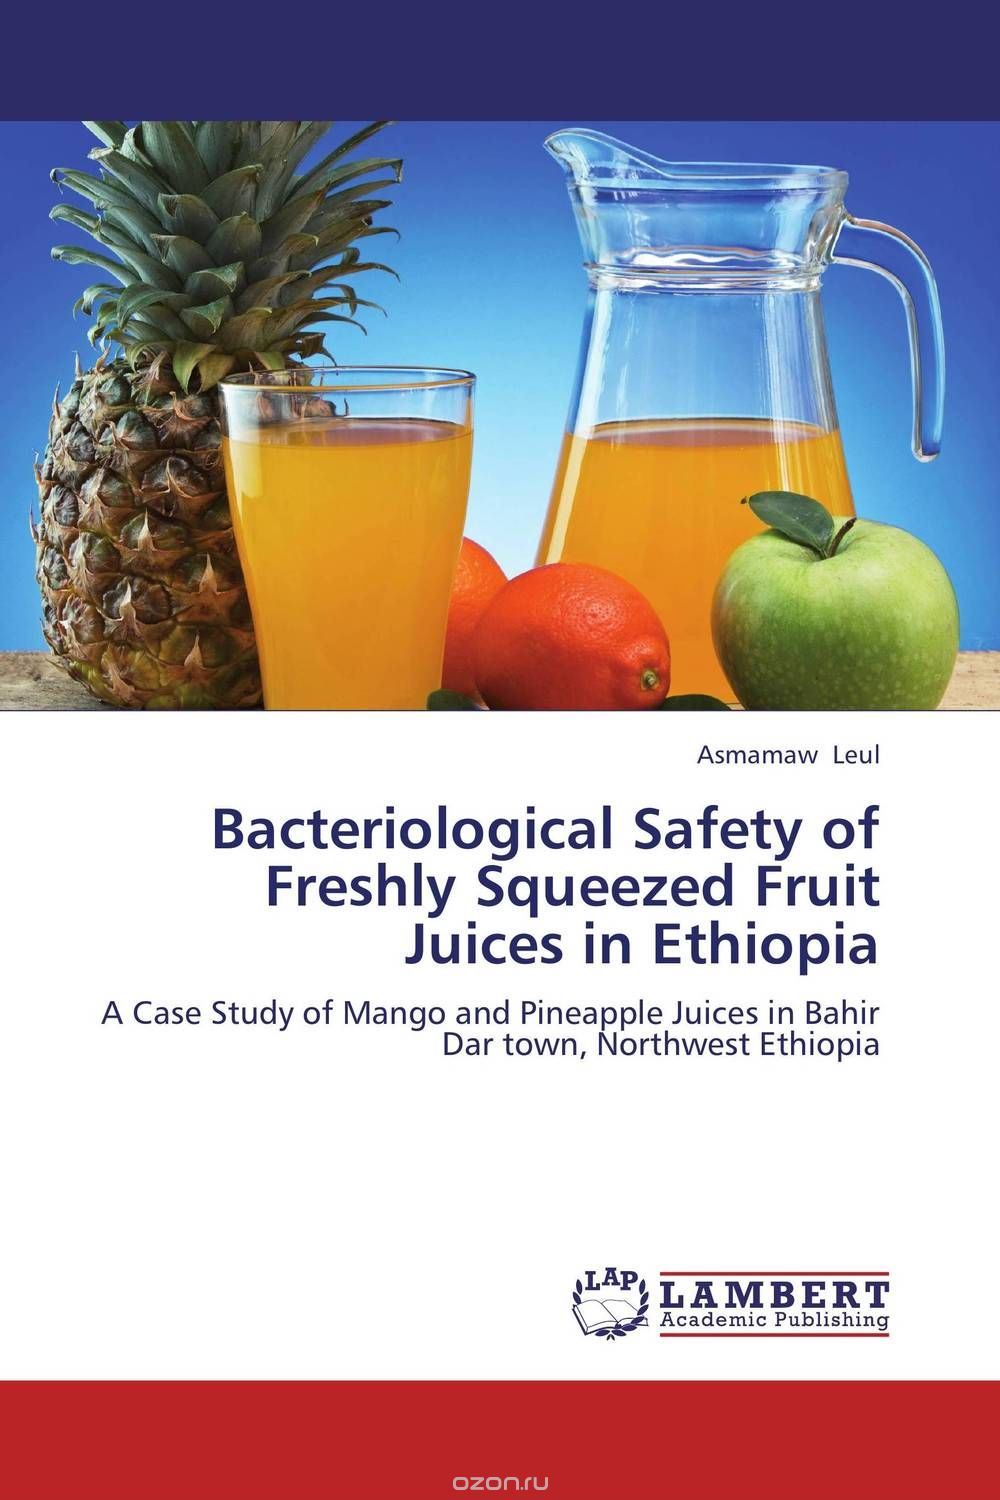 Скачать книгу "Bacteriological Safety of Freshly Squeezed Fruit Juices in Ethiopia"